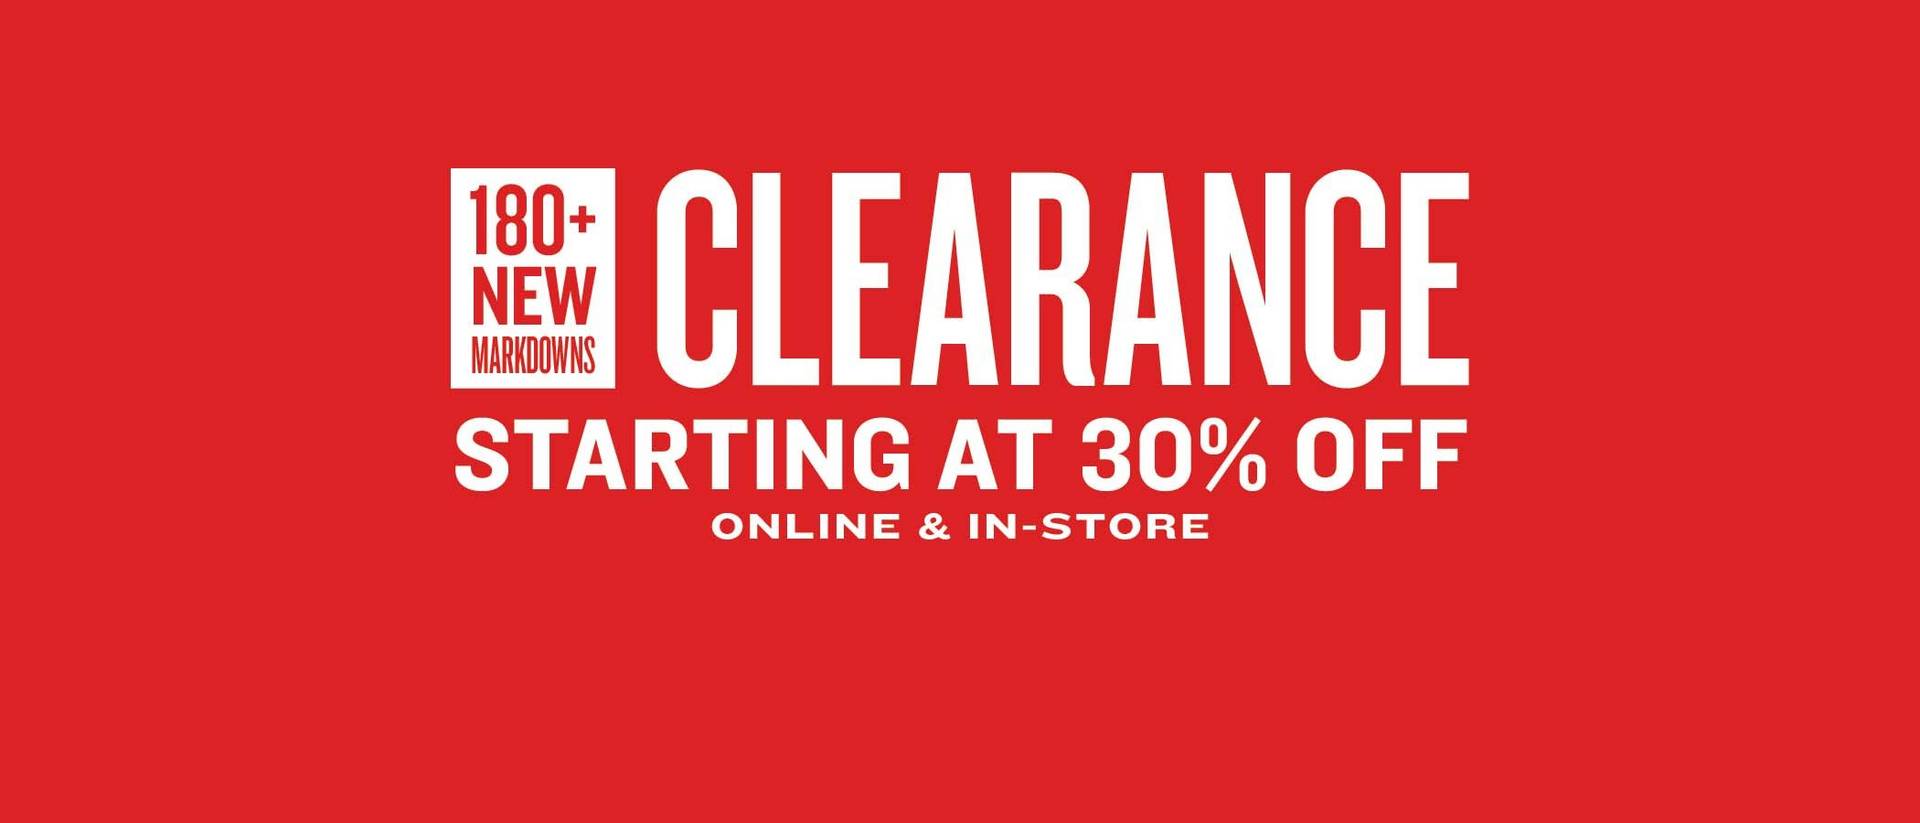 one hundred eighty plus new markdowns, clearance at thirty percent off